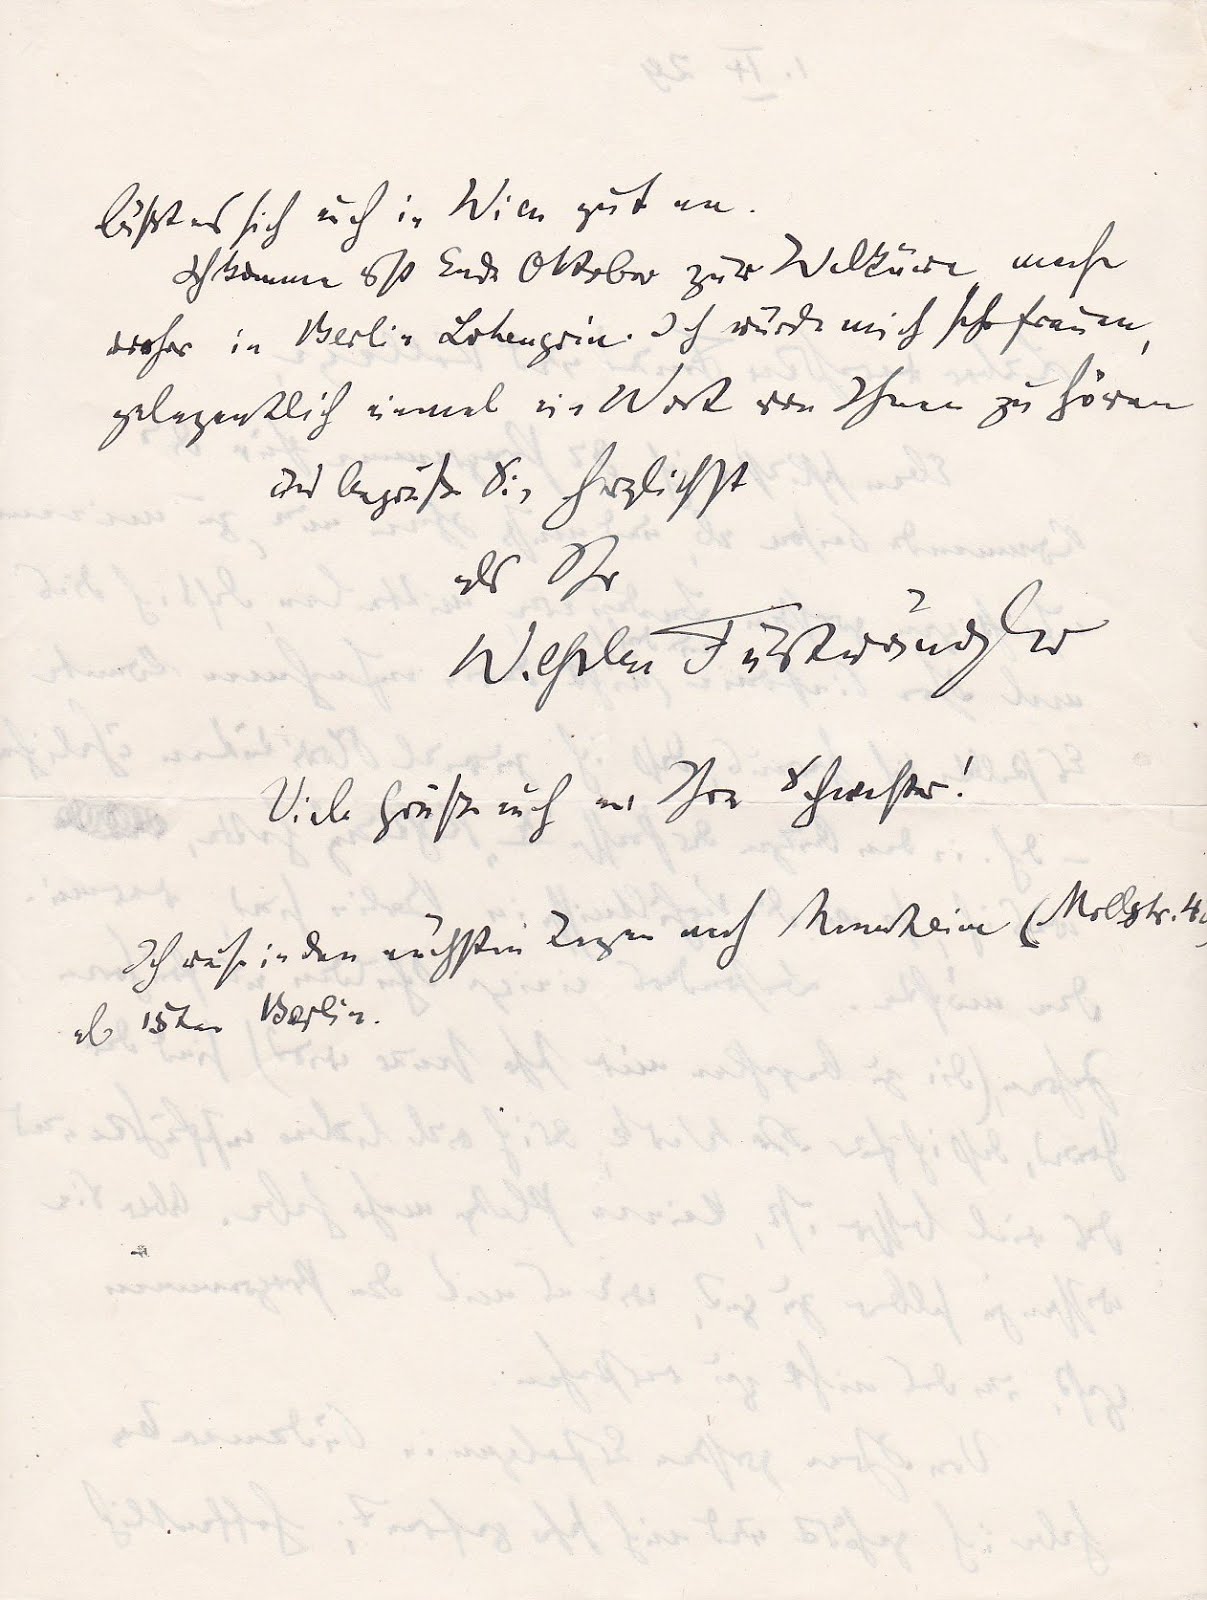 Conductor Wilhelm Furtwaengler pens a 2 page letter to his colleague Robert Heger